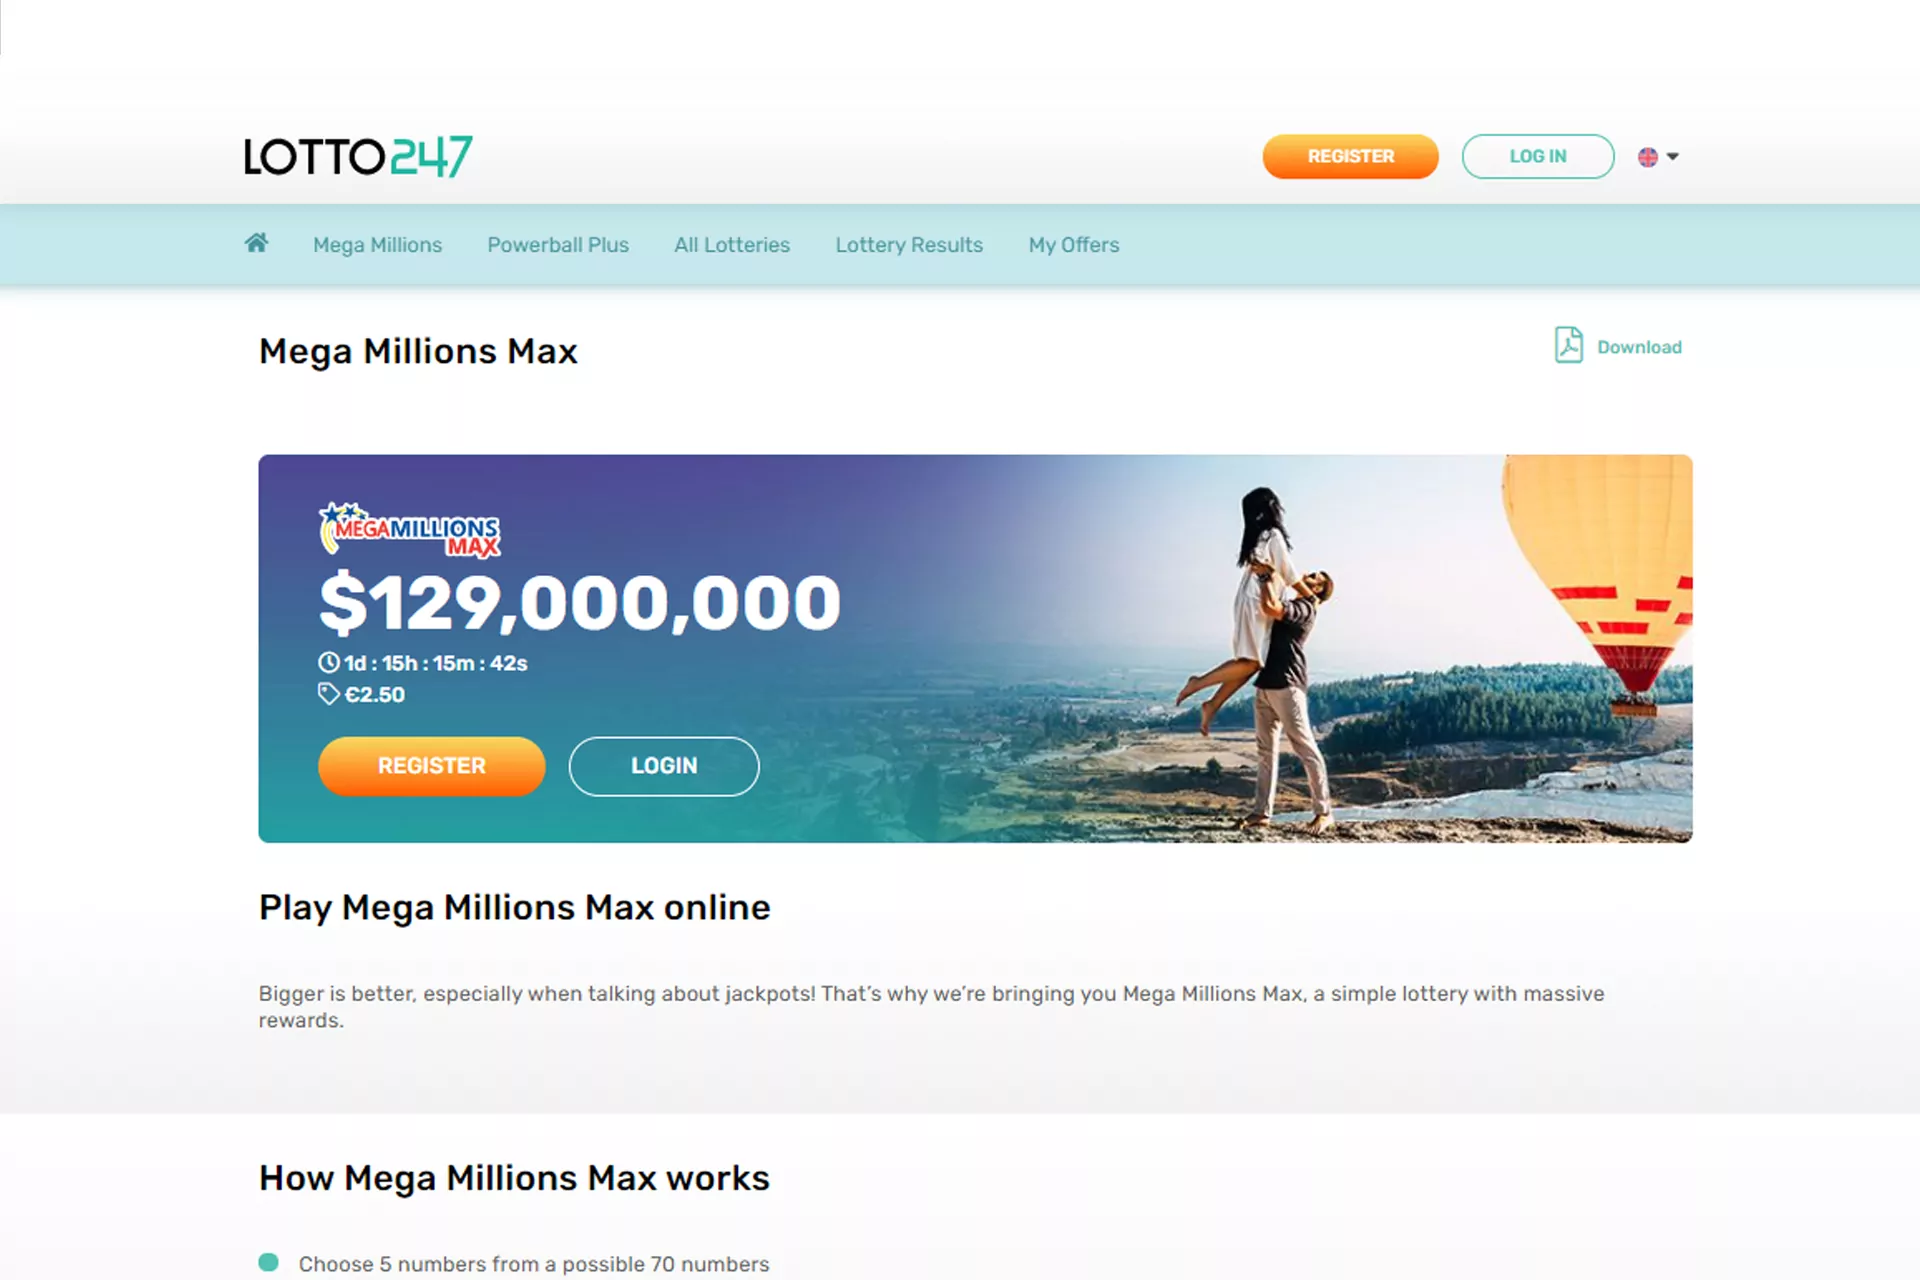 Collect a jackpot over 100 million dollars playing Mega Millions Max.